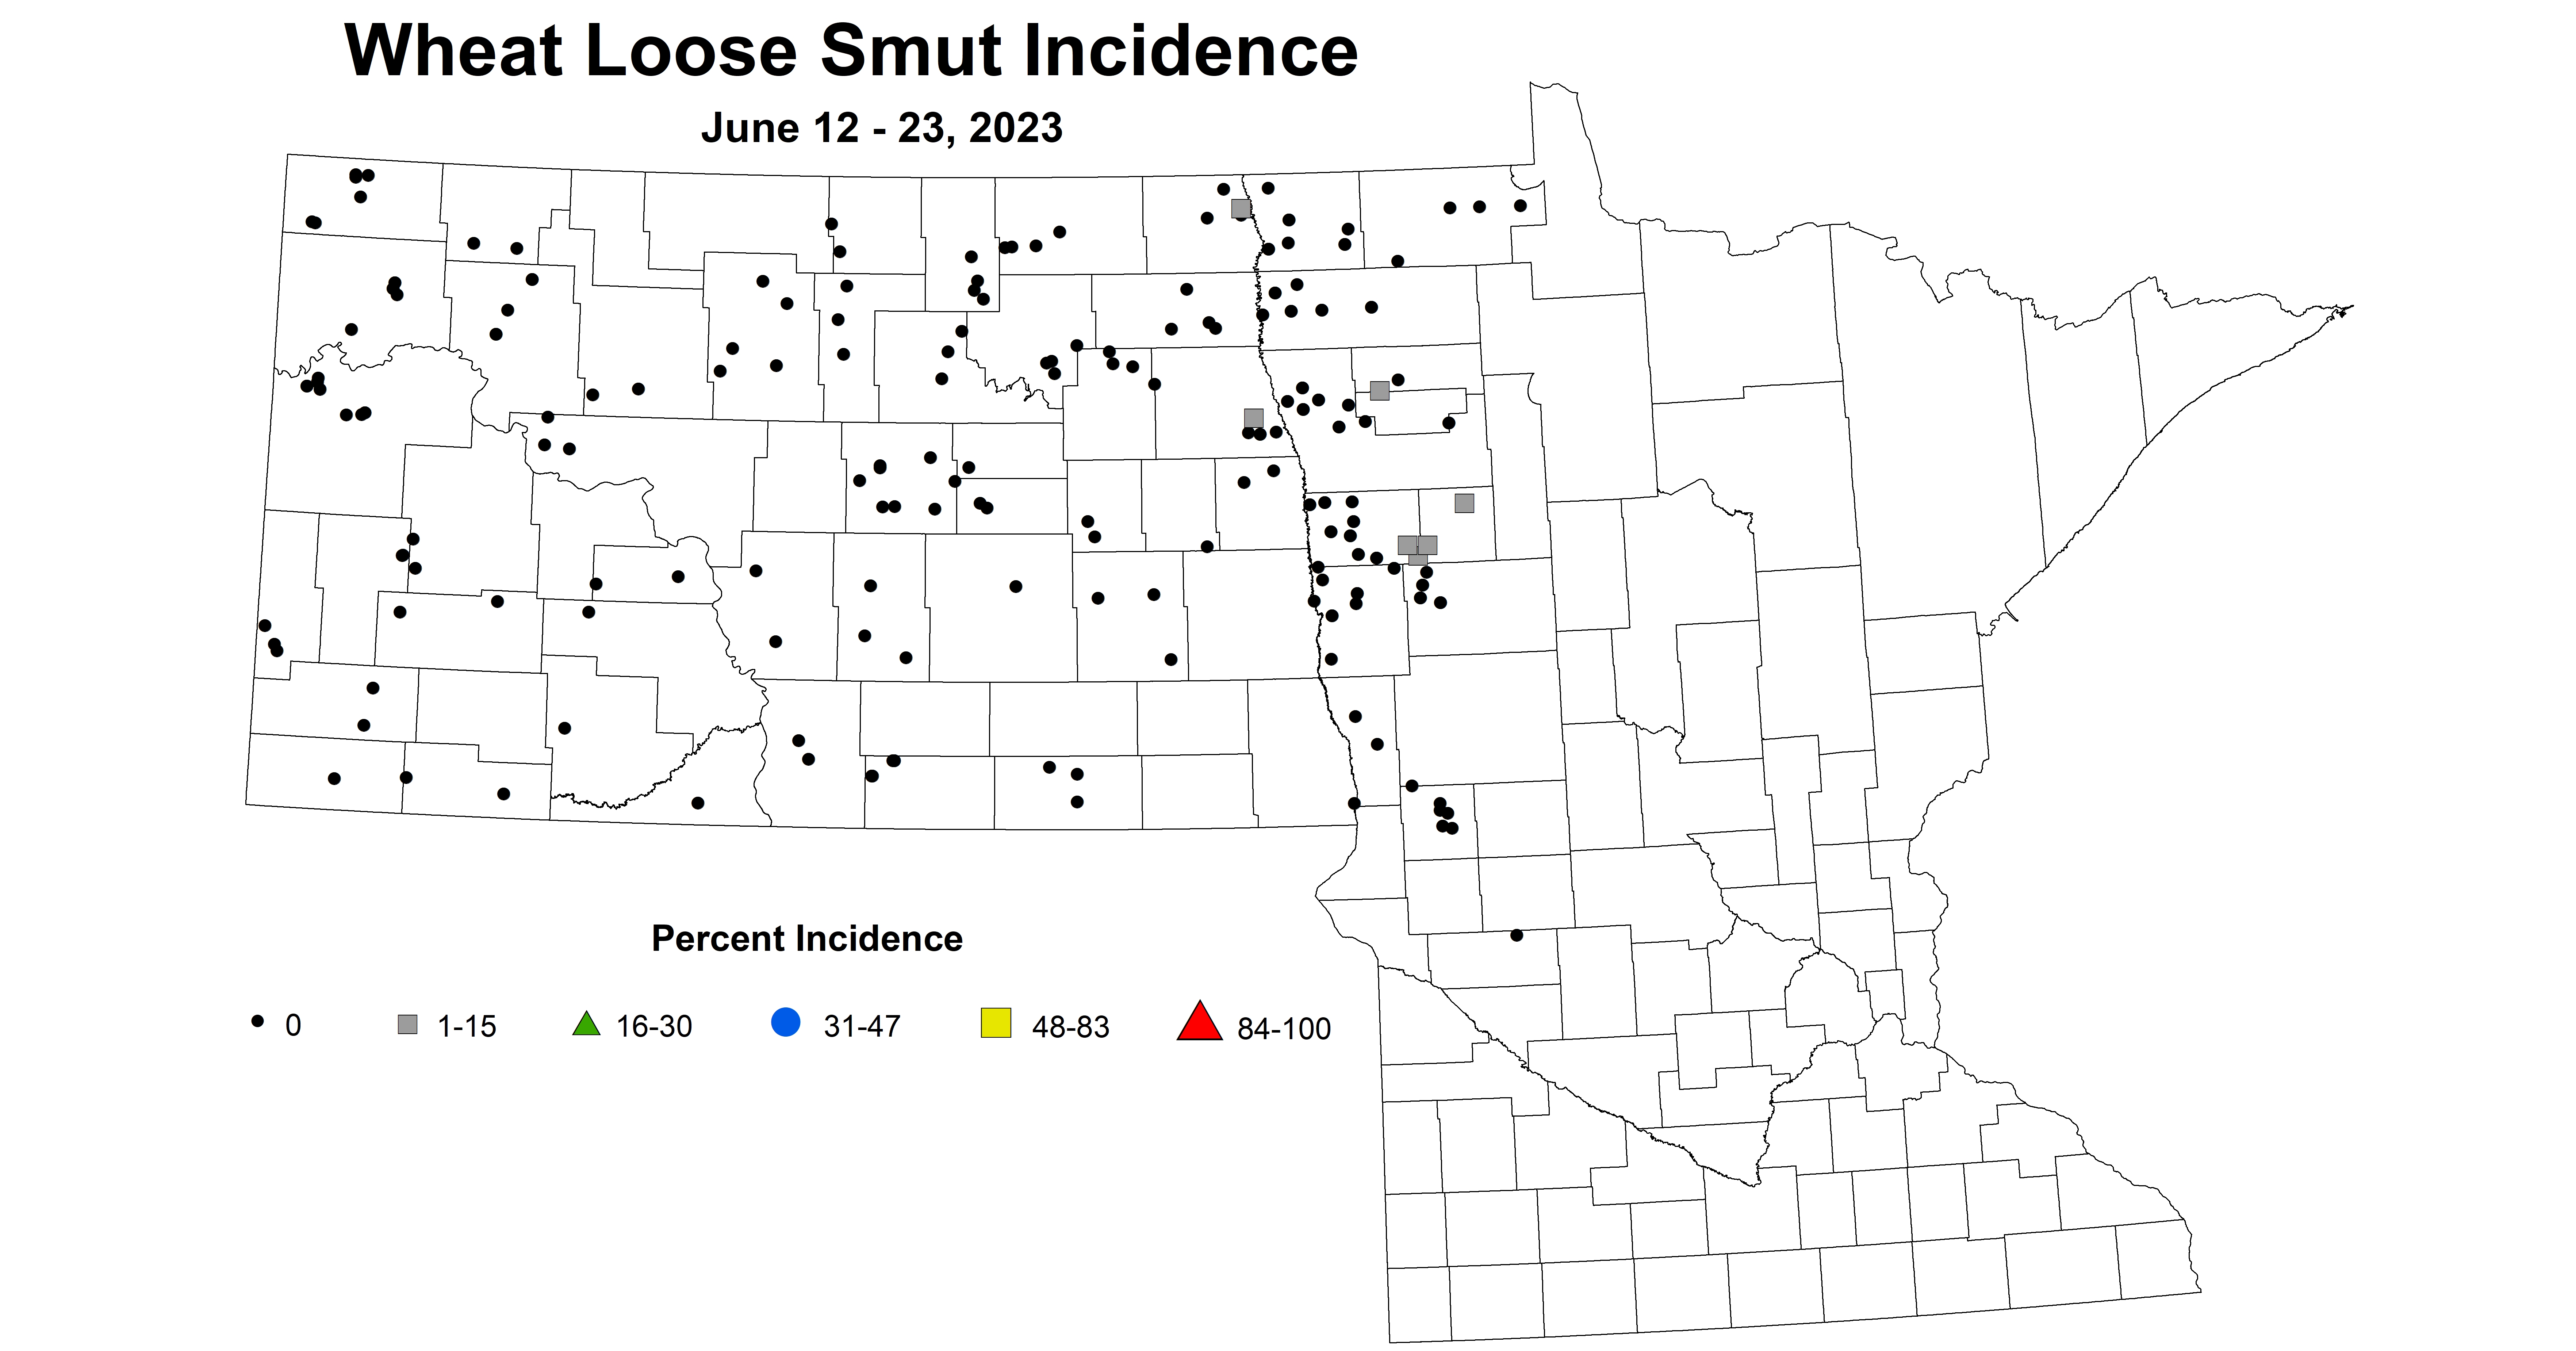 wheat loose smut incidence June 12-23 2023 updated